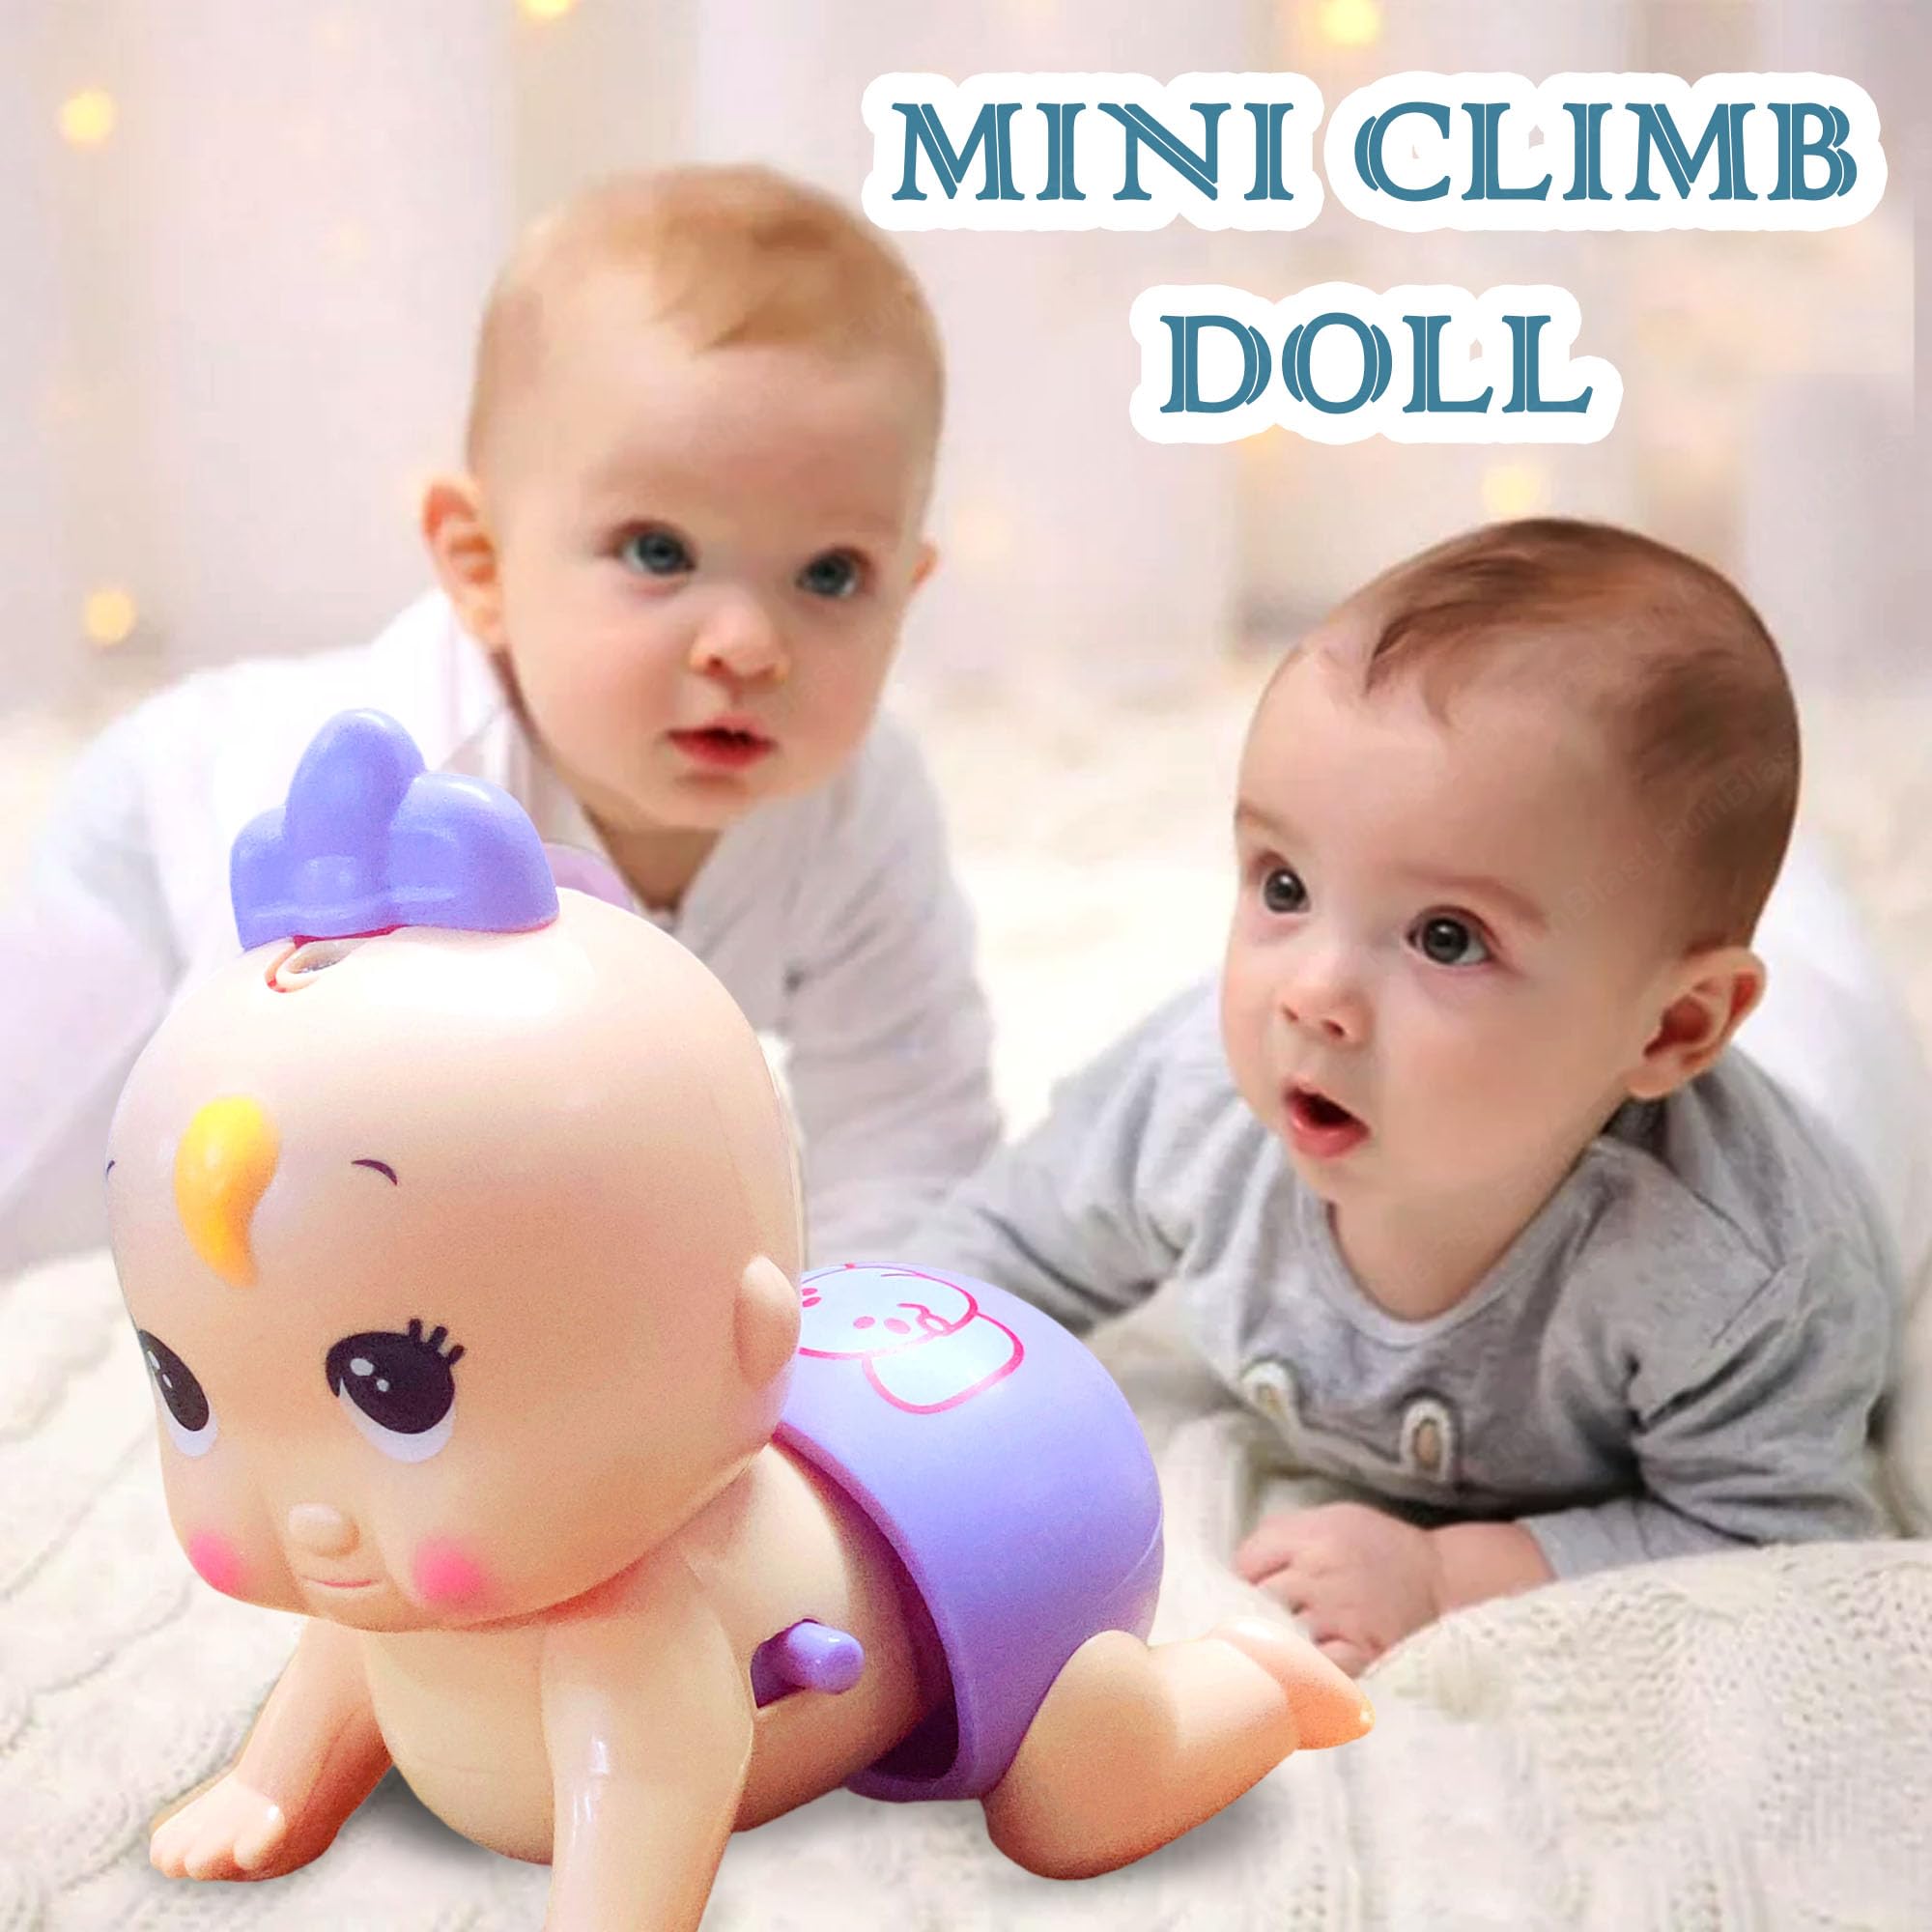 FunBlast Cute Baby Crawling Toy for Kids - Electric Mini Climb Doll, Crawling Baby Toy with Musical Sound, Sound Toys for 18+ Months Kids, Boys, Girls (Pack of 1; Random Color)